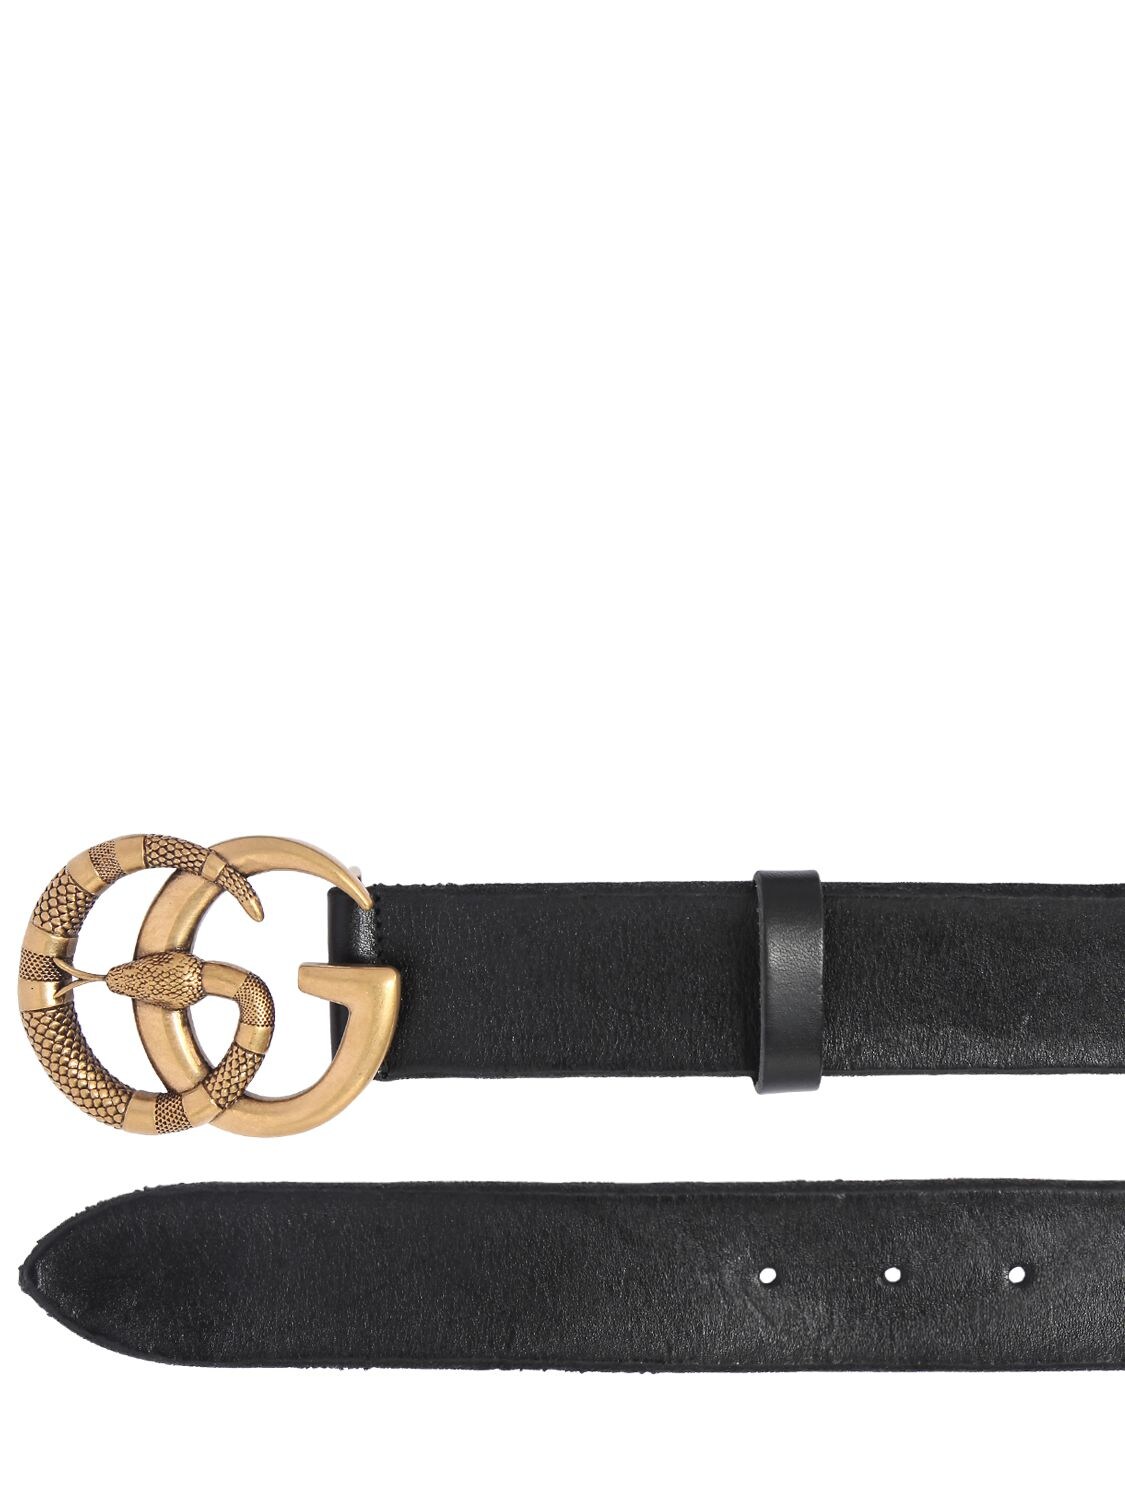 Shop GUCCI 2020 SS Leather Belt With Double G Buckle With Snake ( 458949  CVE0T 1000, 458949 CVE0T 2535) by mizutamadot